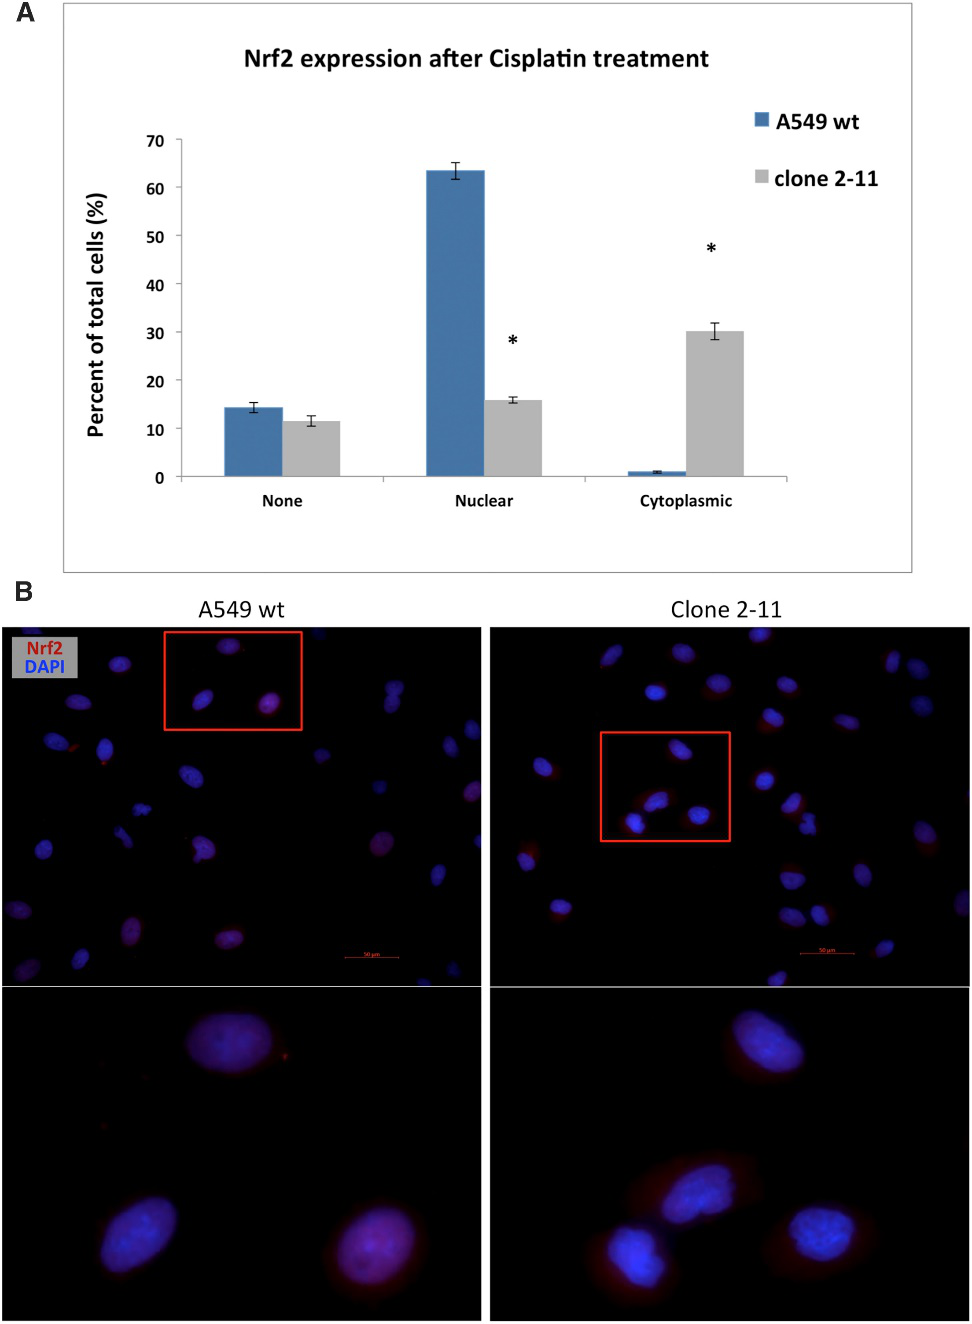 Cisplatin-Induced Nuclear and Cytoplasmic Localization of NRF2 in Wild-Type A549 Cells and Clone 2-11